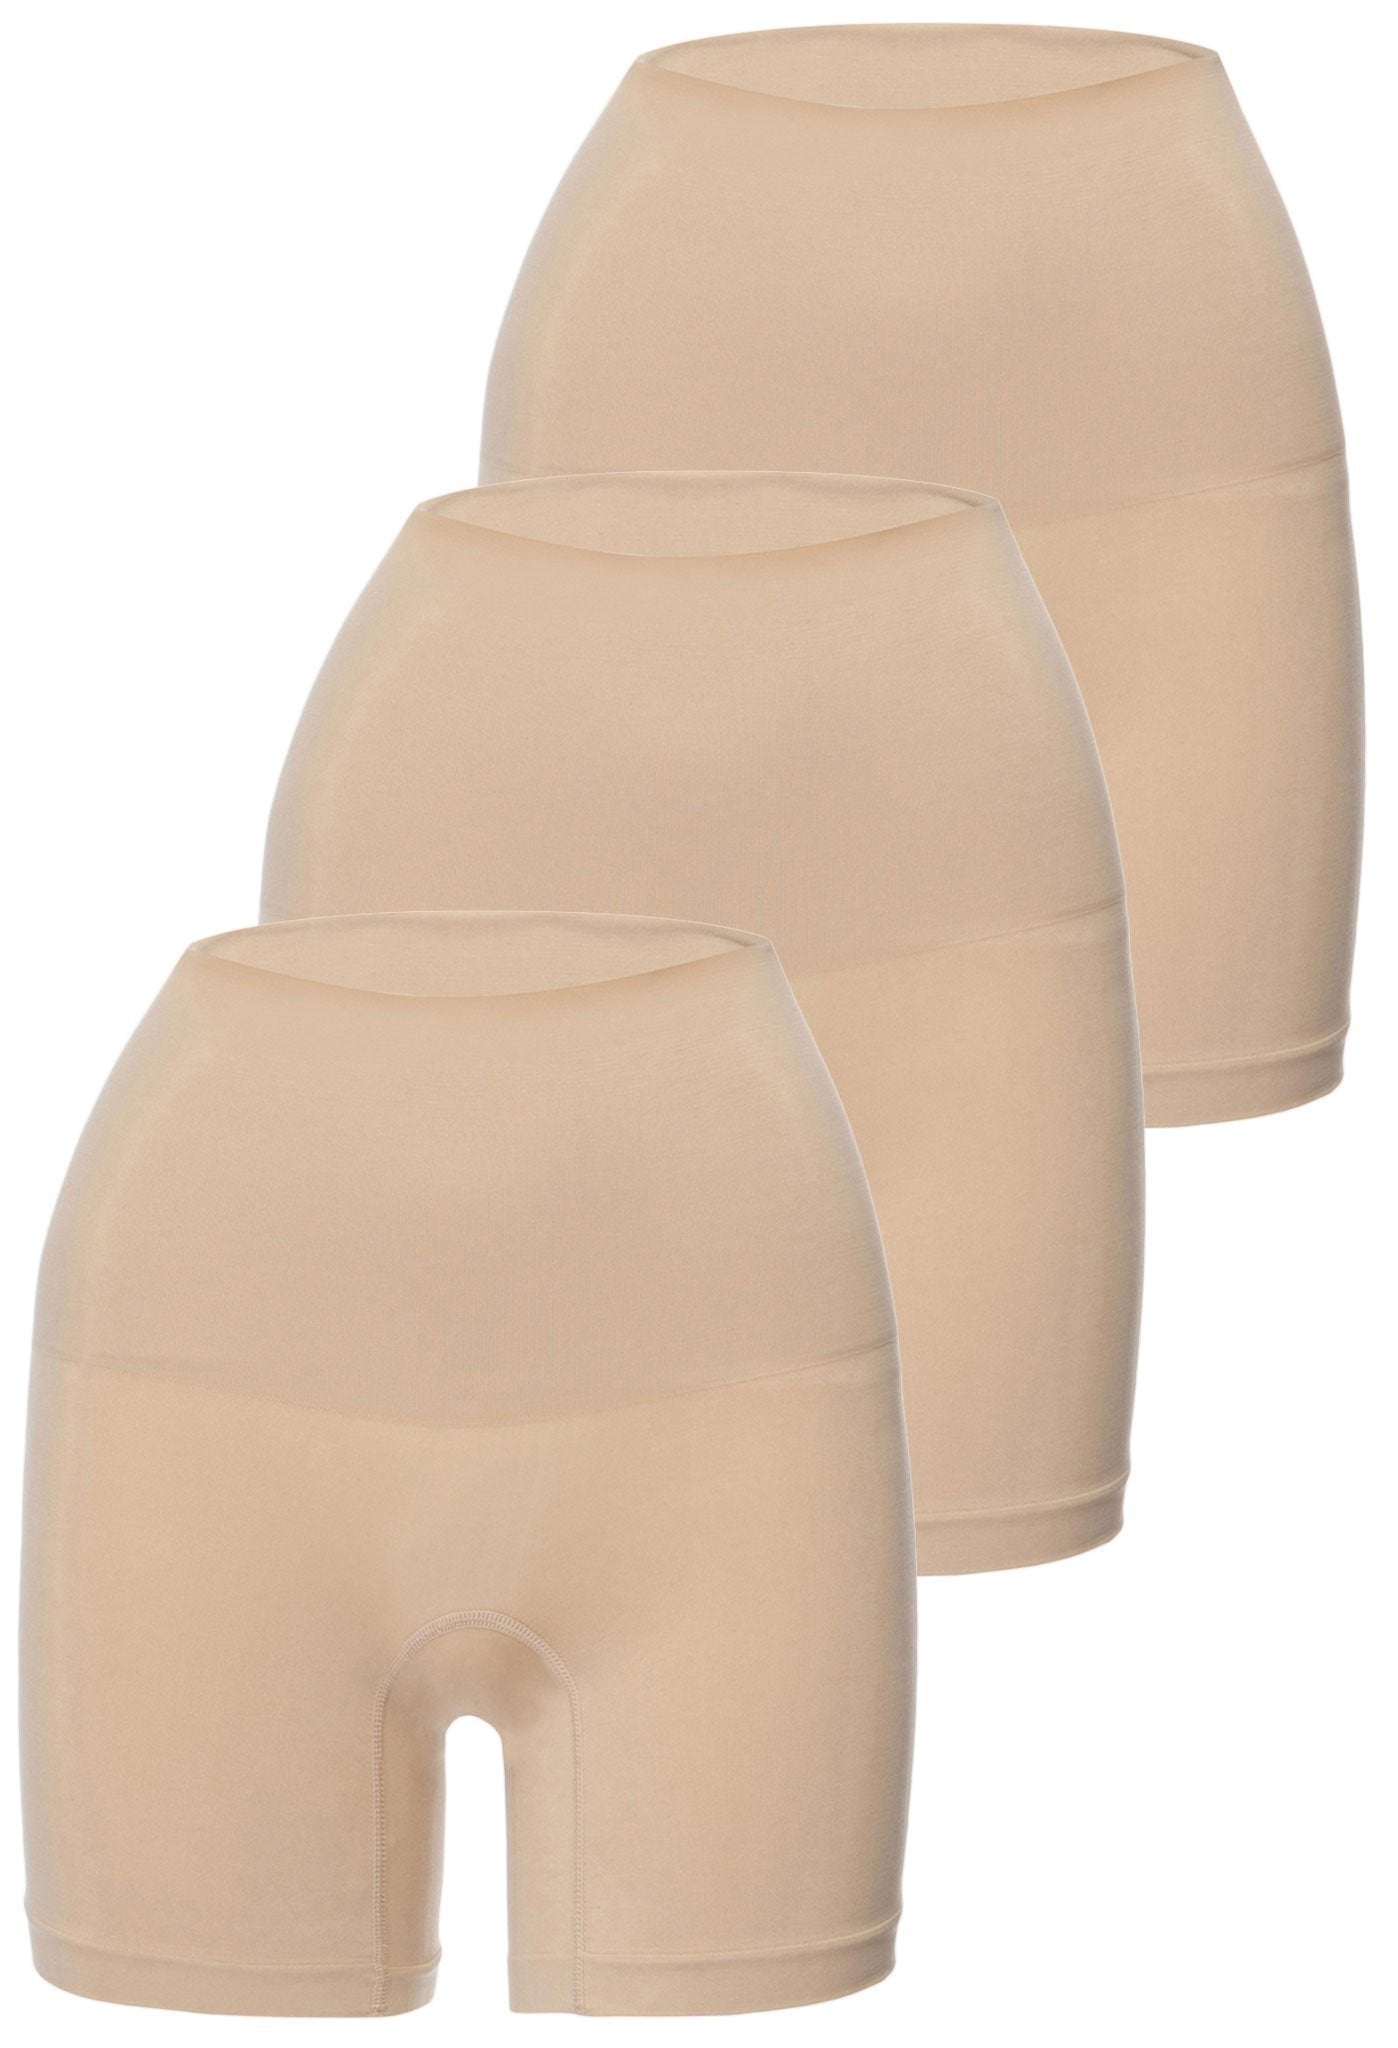 Low Back Shaping Shorts - 3 Pack